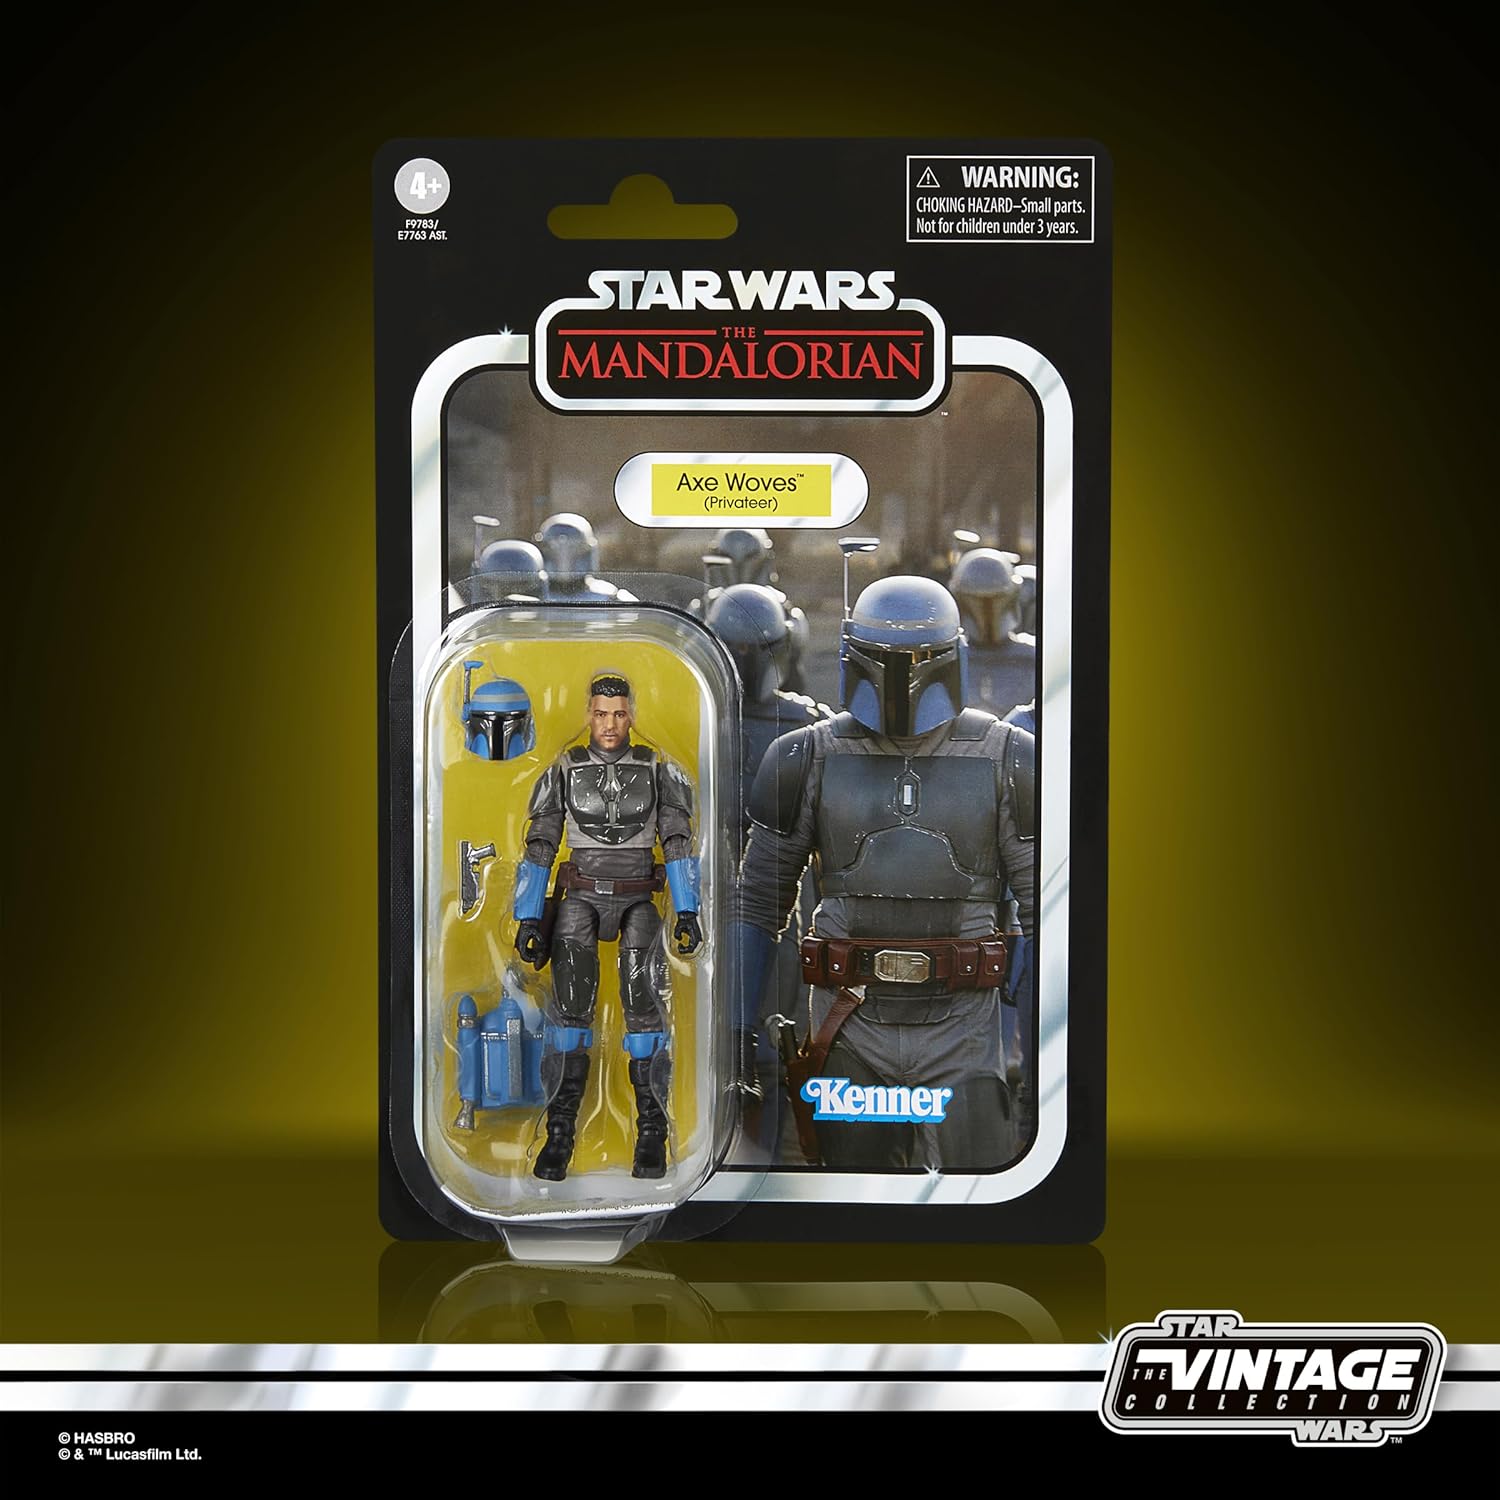 Star Wars The Mandalorian Axe Woves (Privateer) 10cm Action Figure